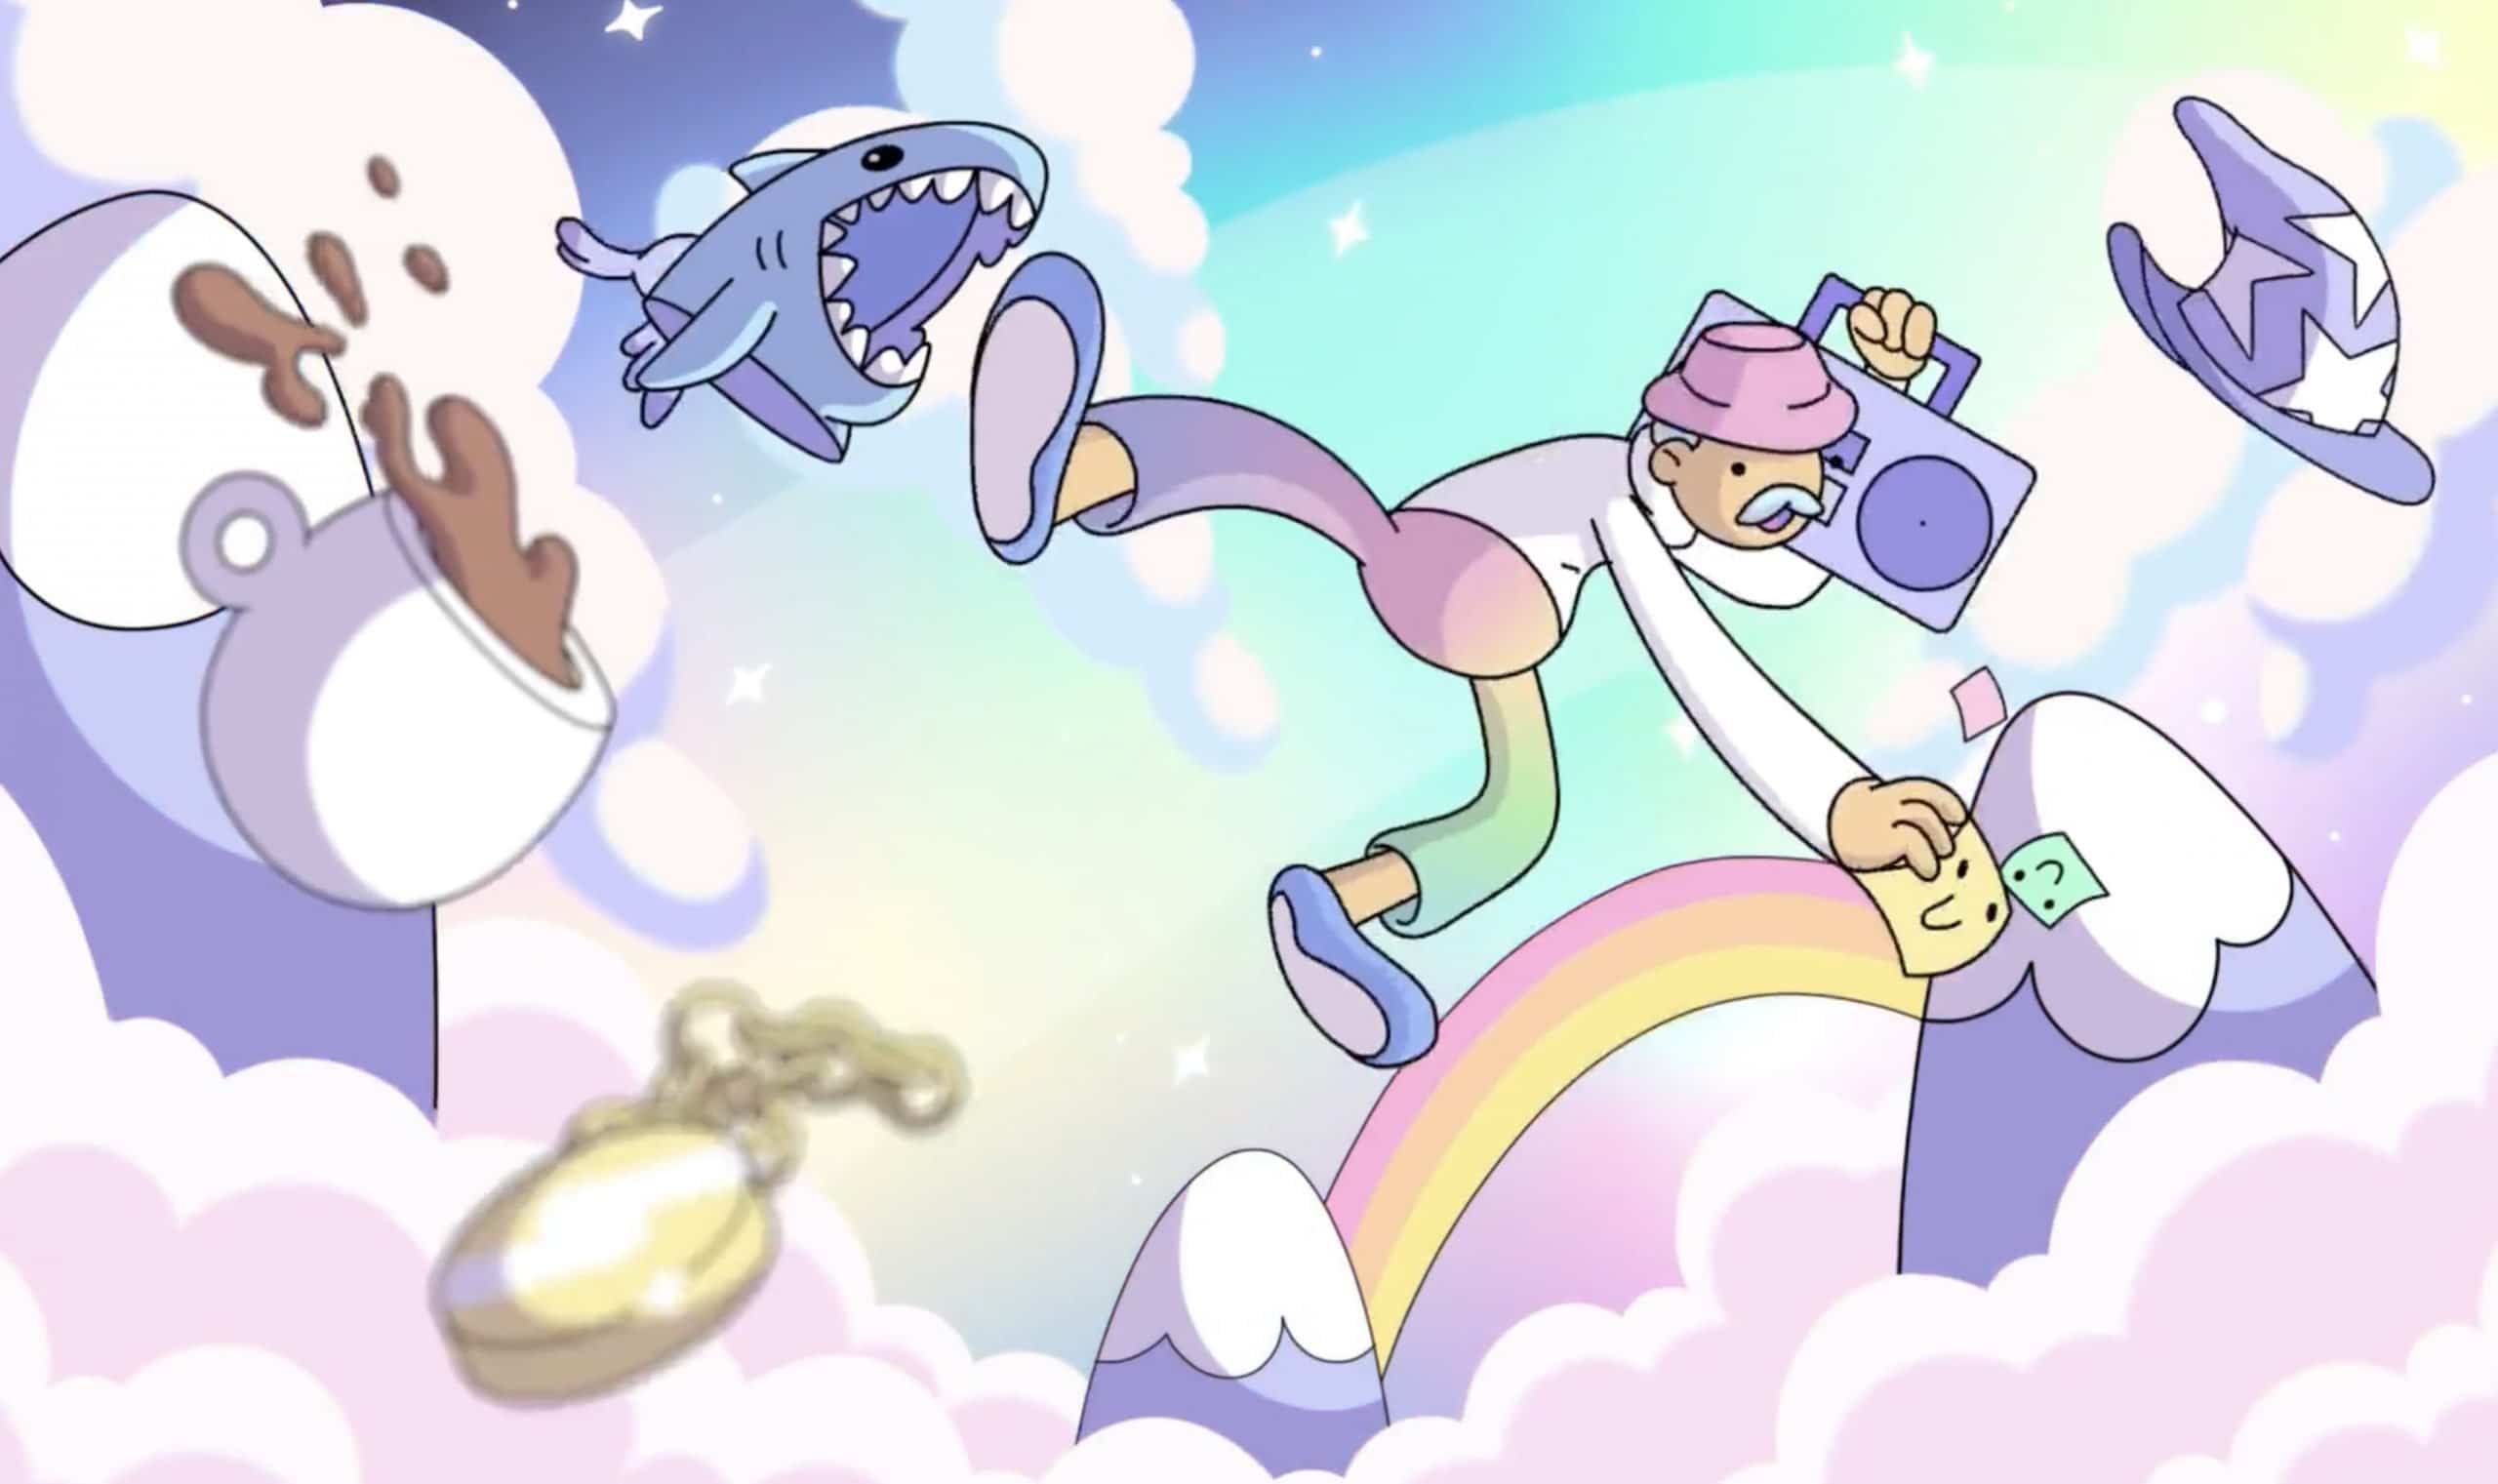 Doodles 2 trailer featuring an animated character with rainbow and other accessories